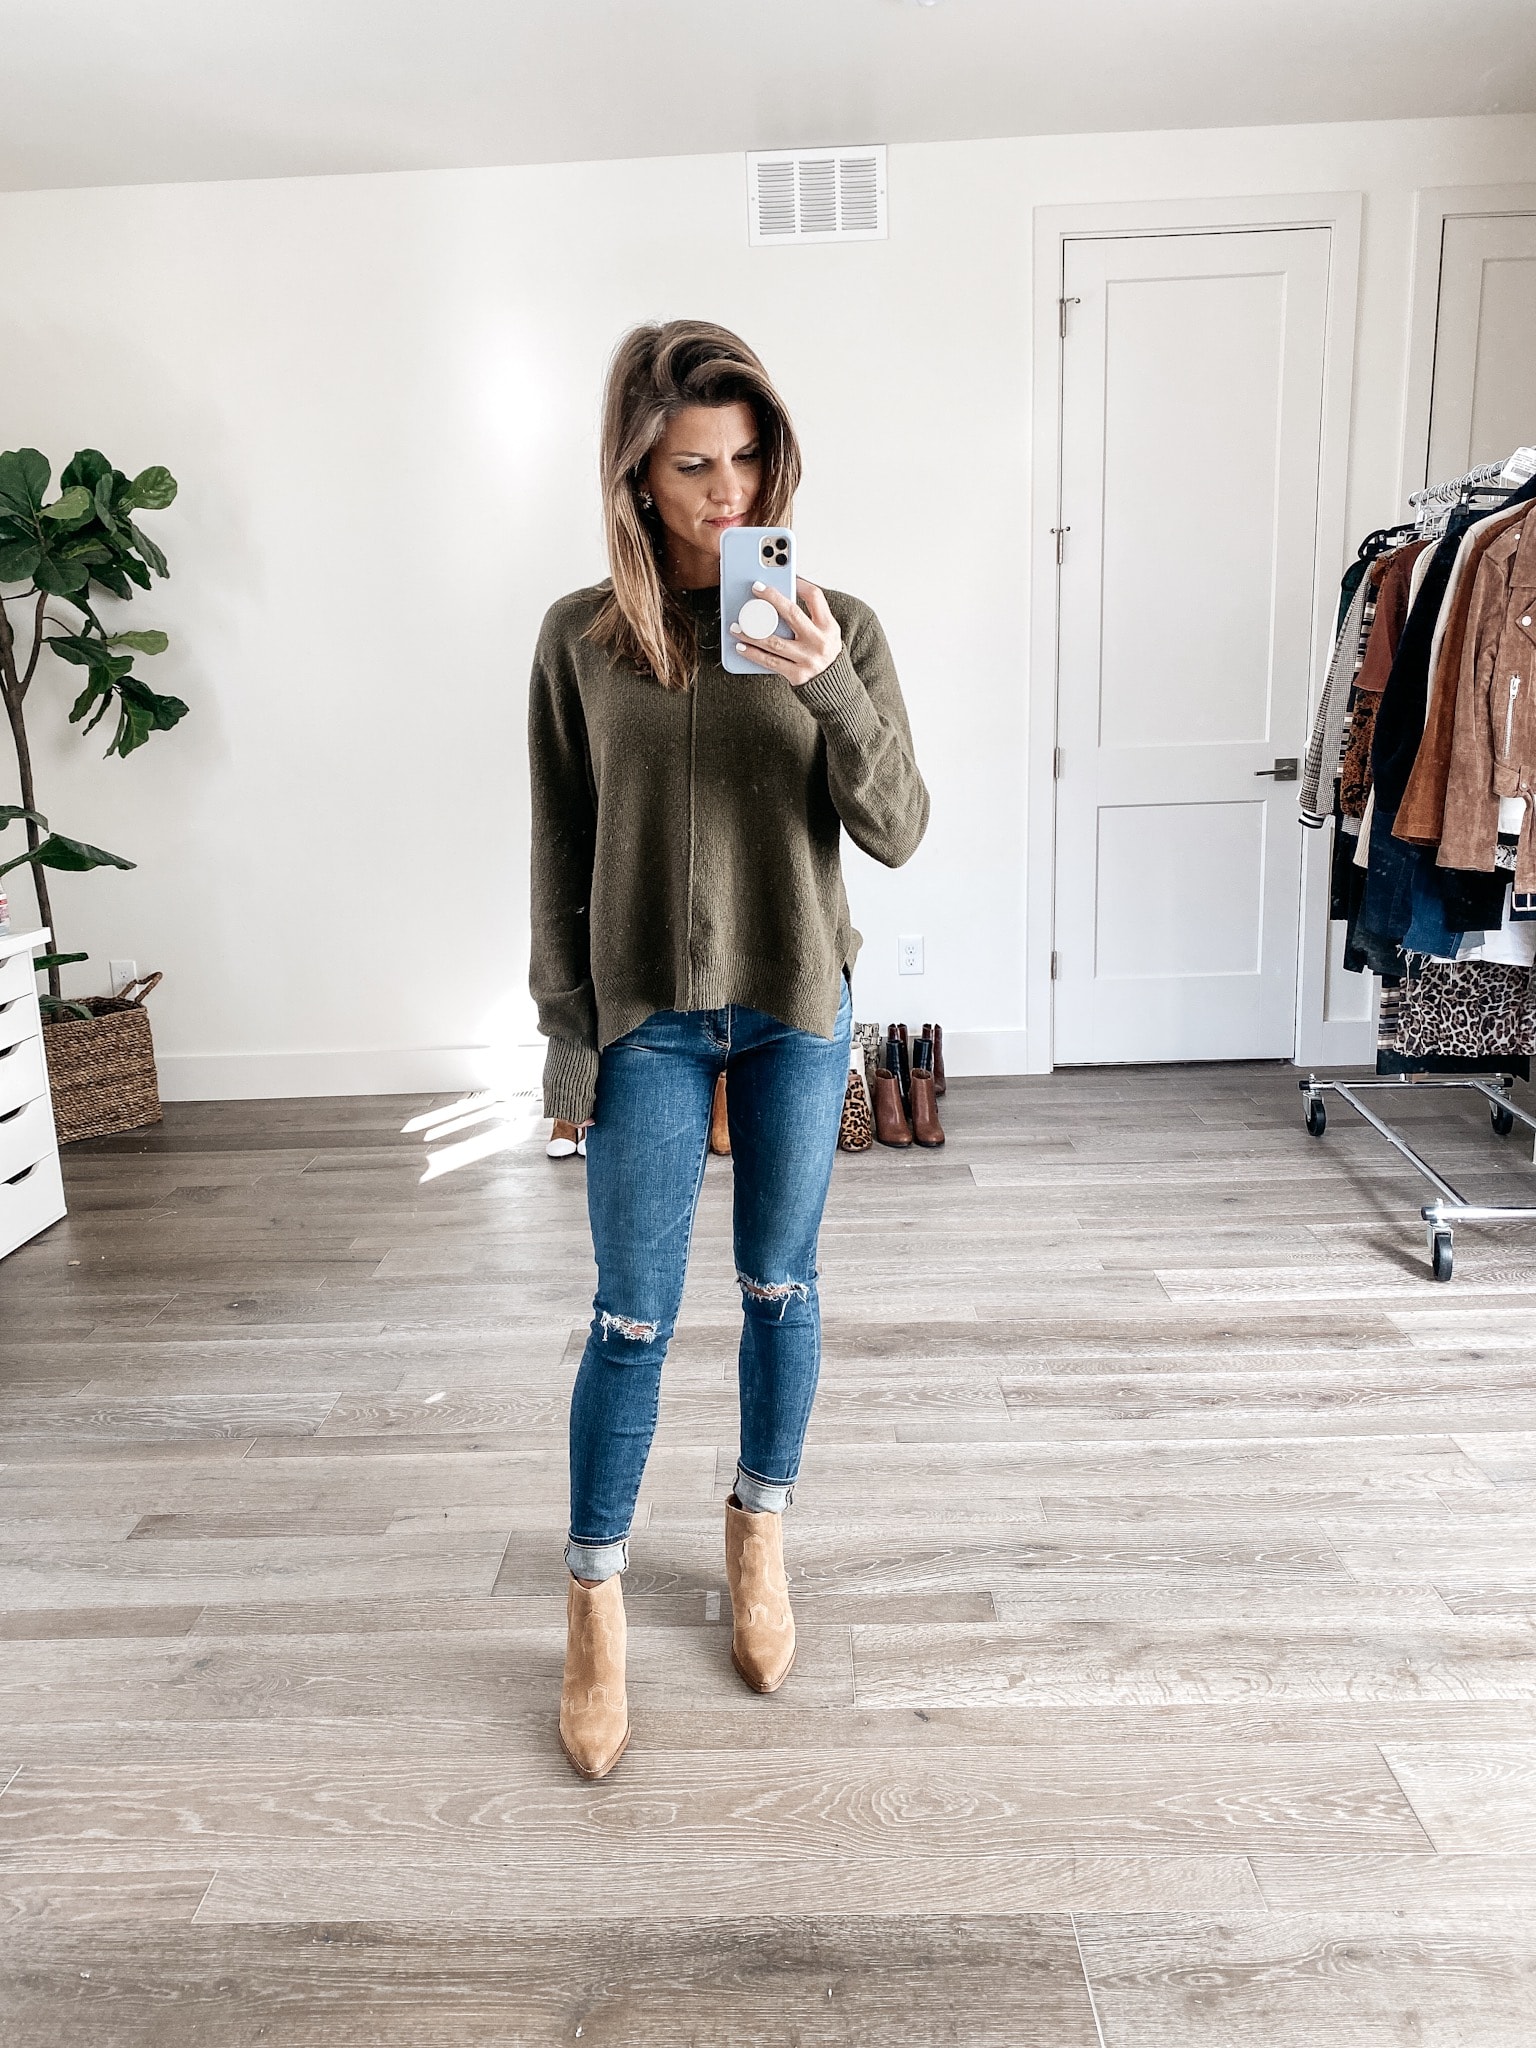 How to Wear Ankle Boots & Booties - Everything You Need to Know